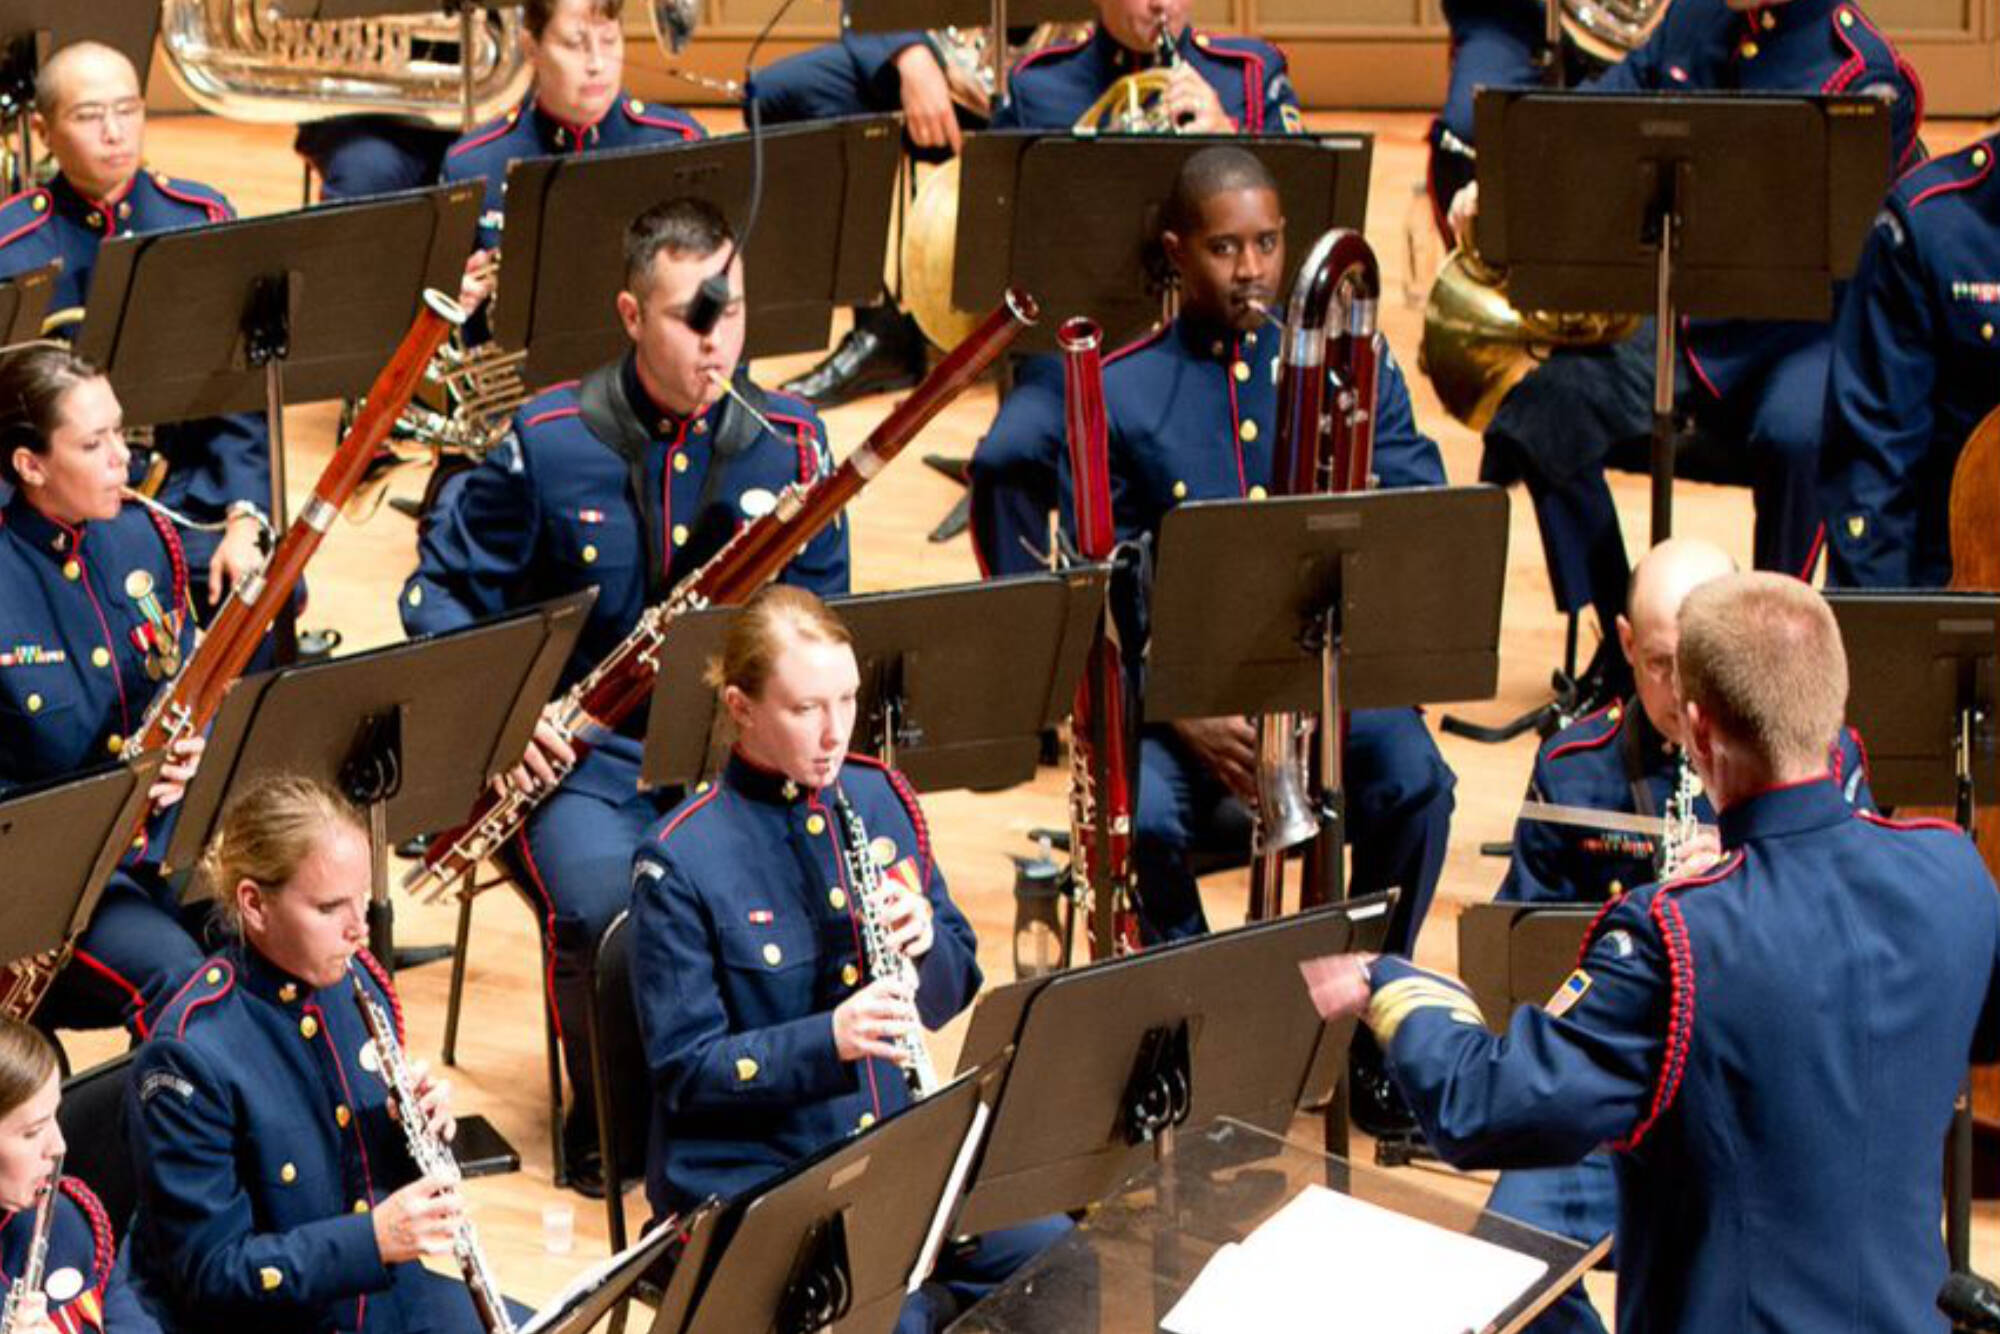 The U.S. Coast Guard Band, seen here, plays as a 55-member ensemble. The band will play in Juneau Saturday as part of its Ready for the Call tour. (Courtesy Photo / U.S. Coast Guard)